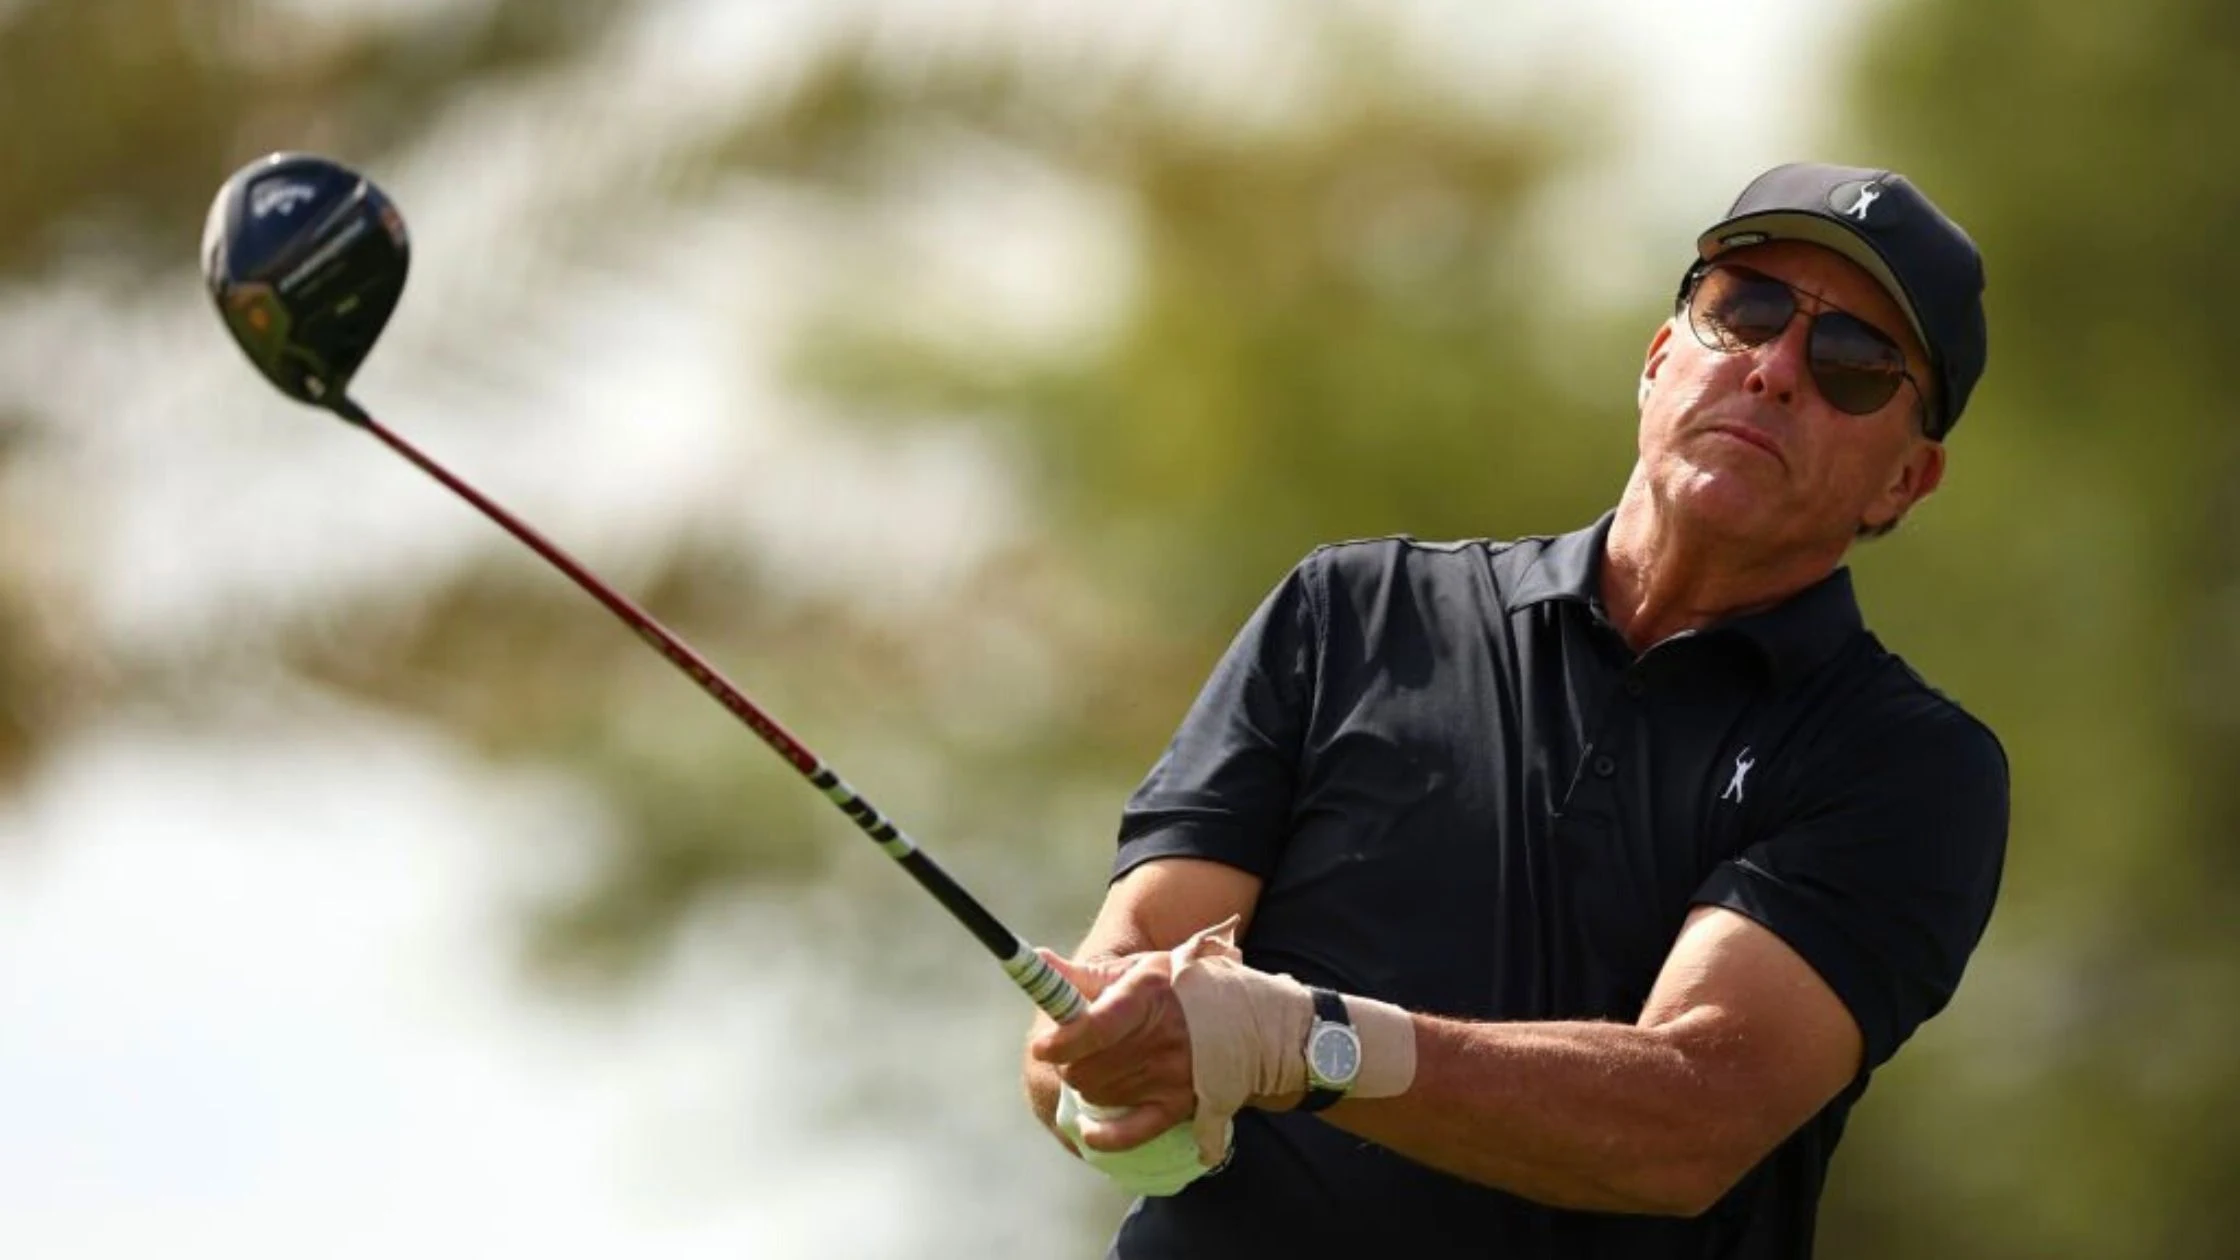 Phil Mickelson Weight Loss